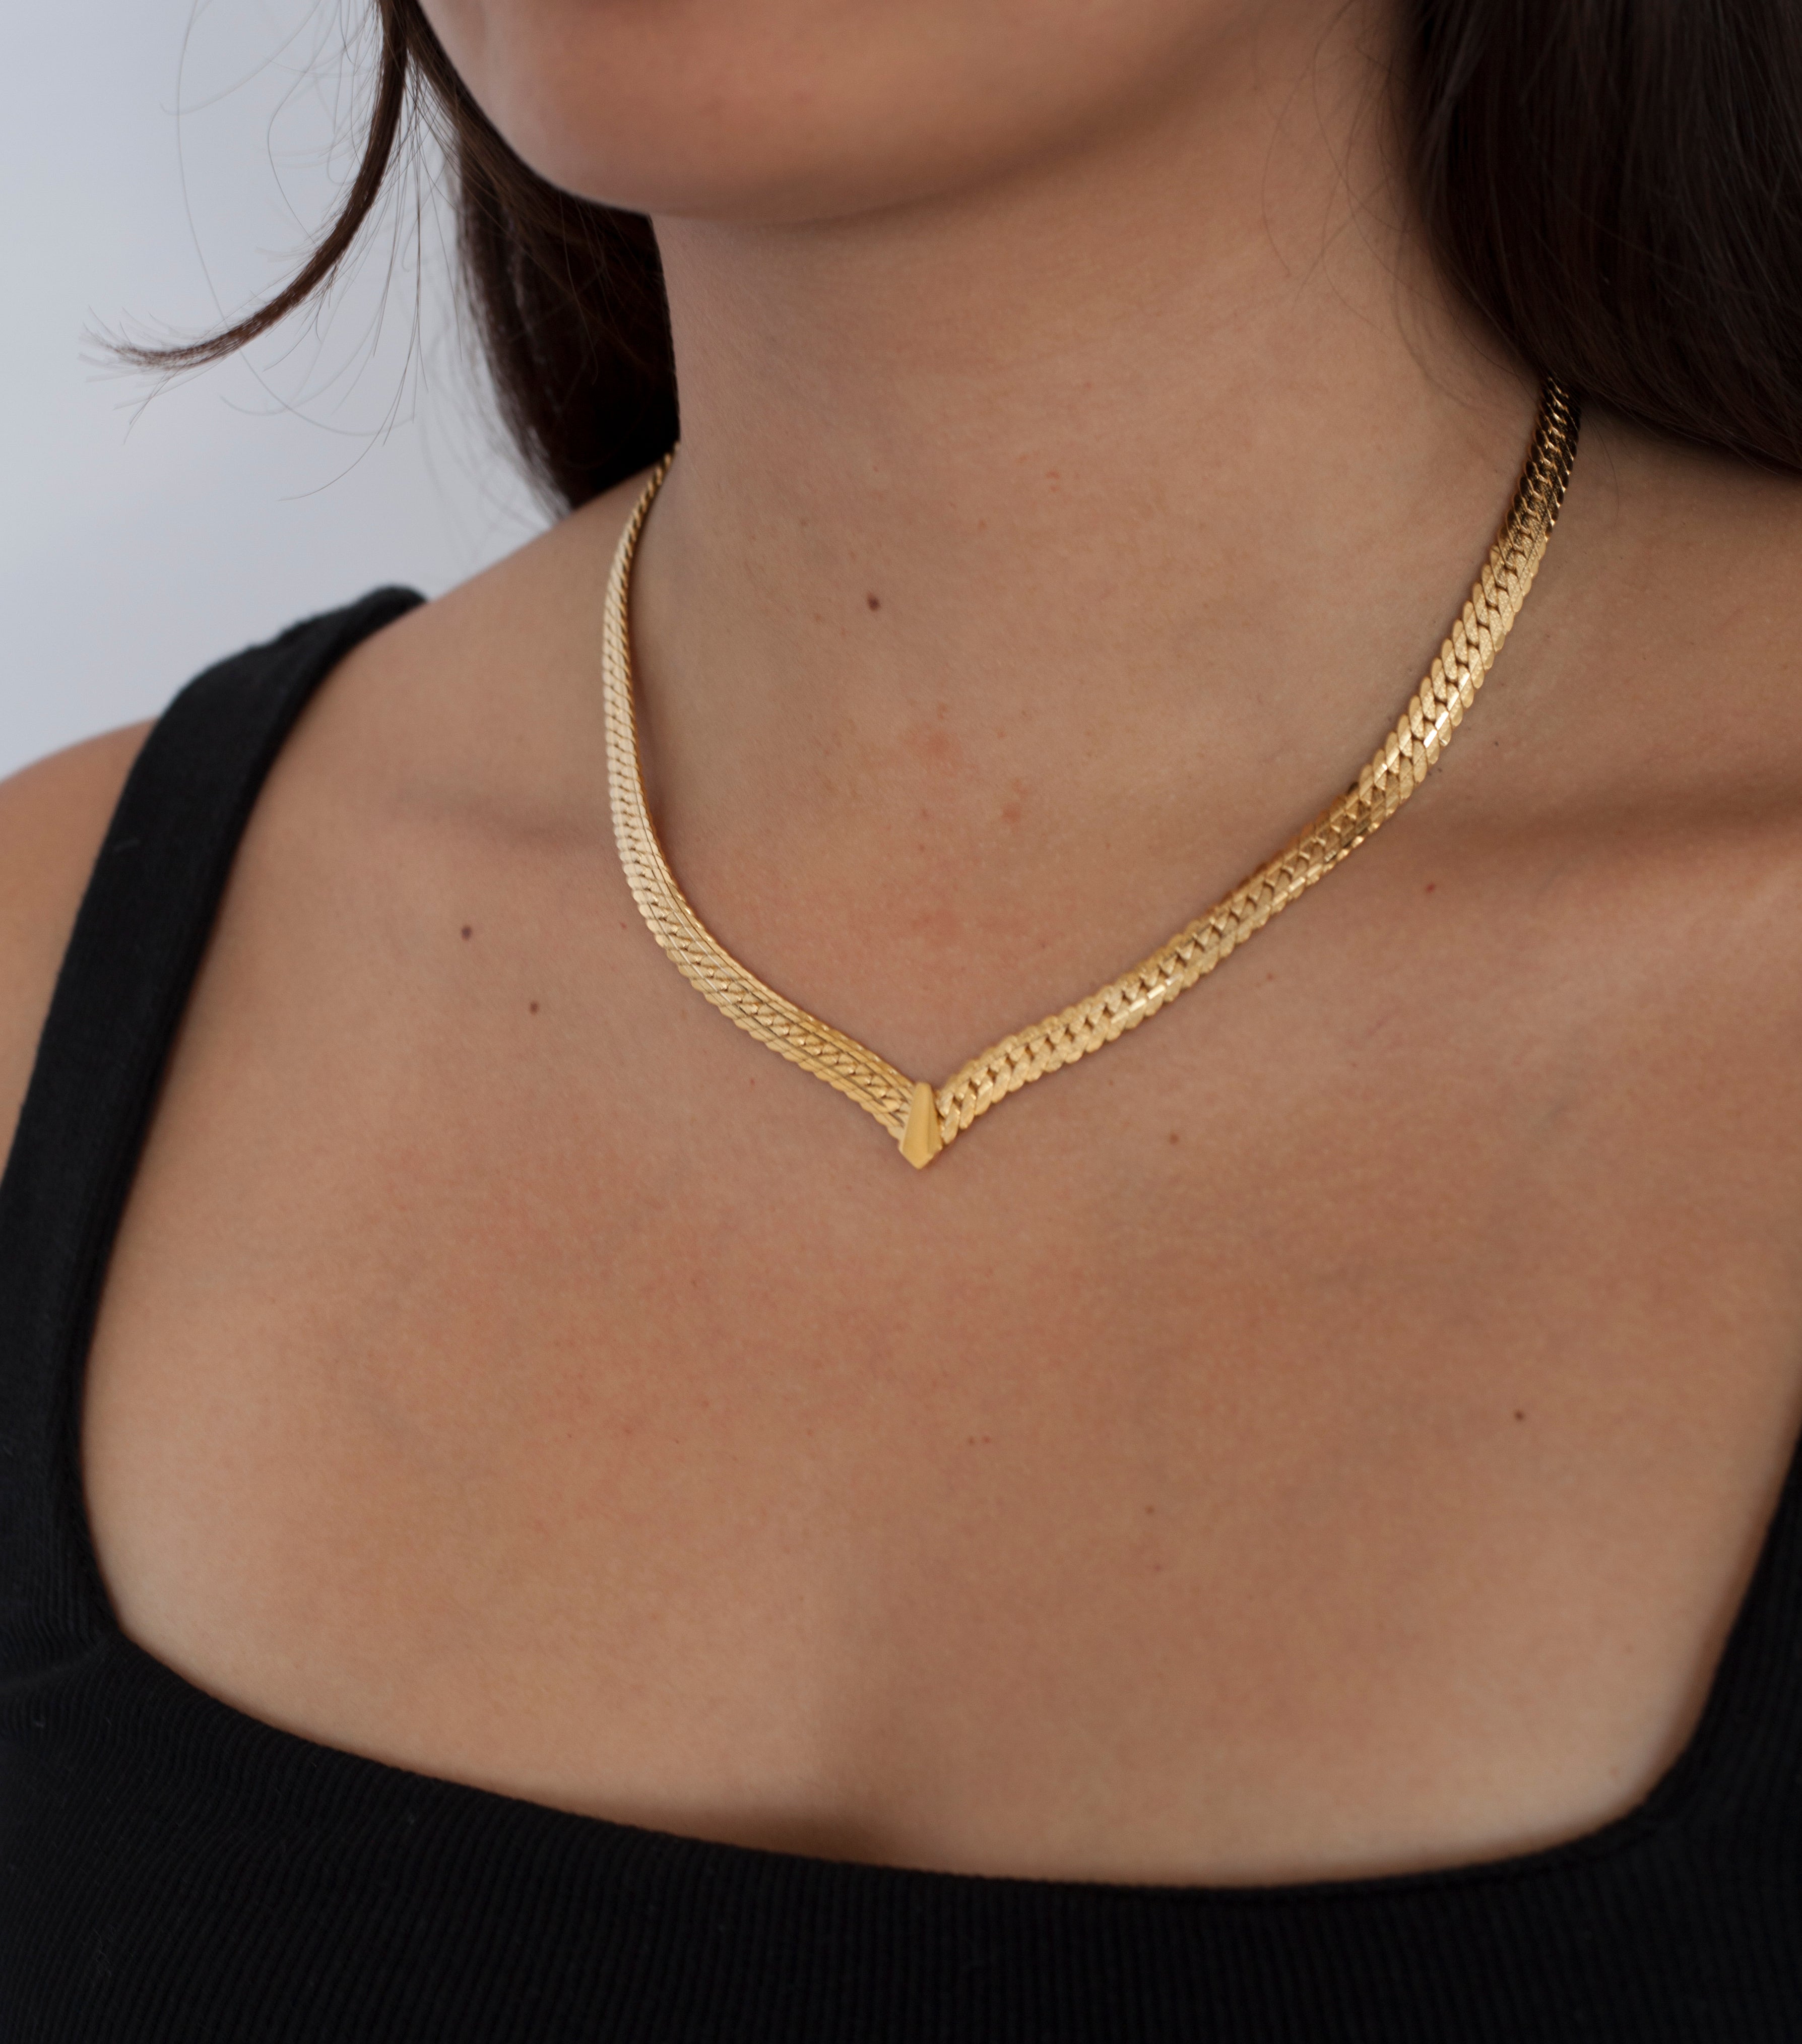 model wearing Thick Snake Chain Necklace with a detailed point and fold over clasp closure.